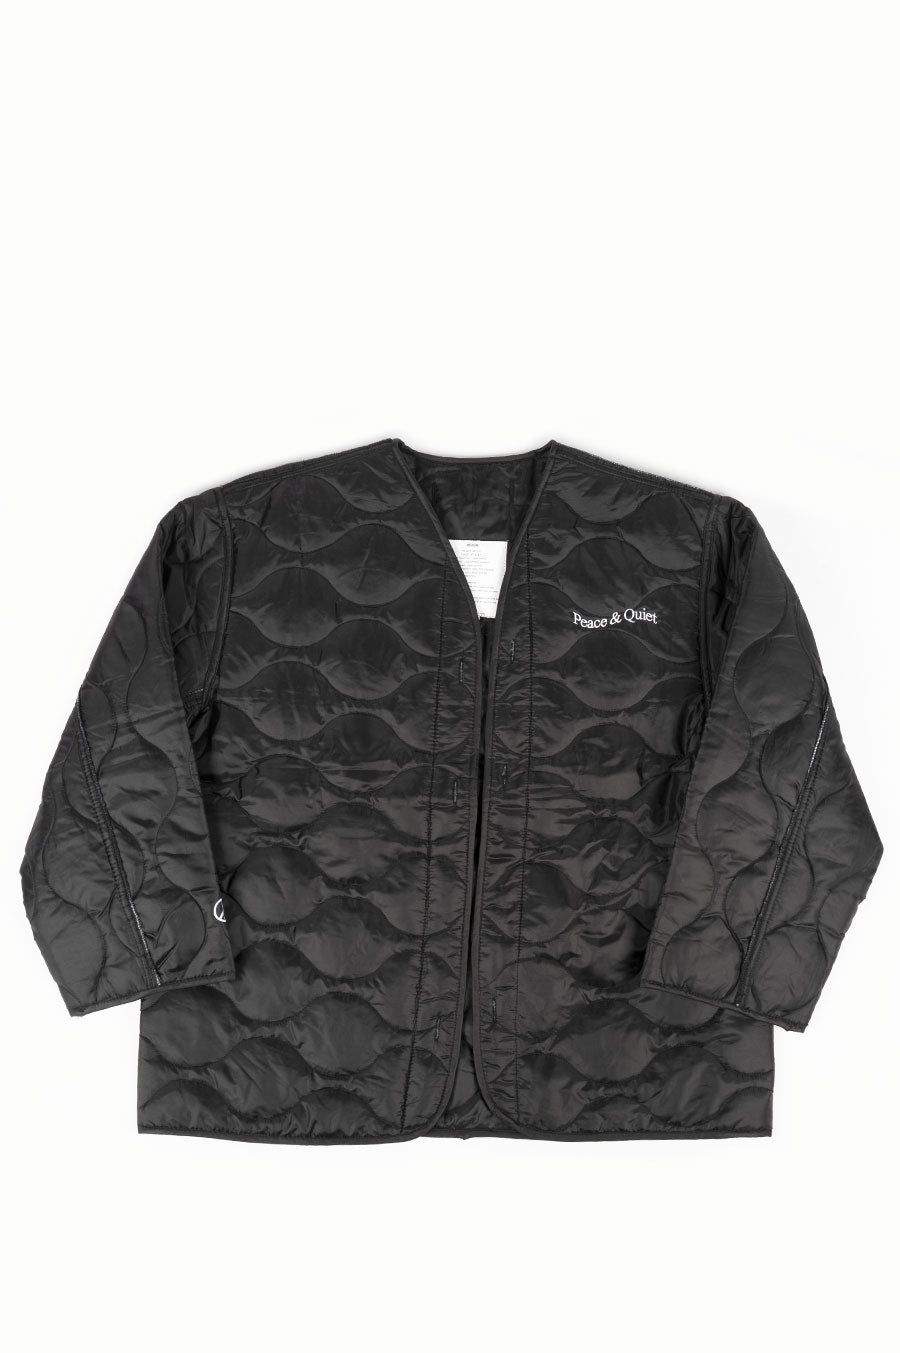 THE MUSEUM OF PEACE AND QUIET WORDMARK LINER JACKET BLACK